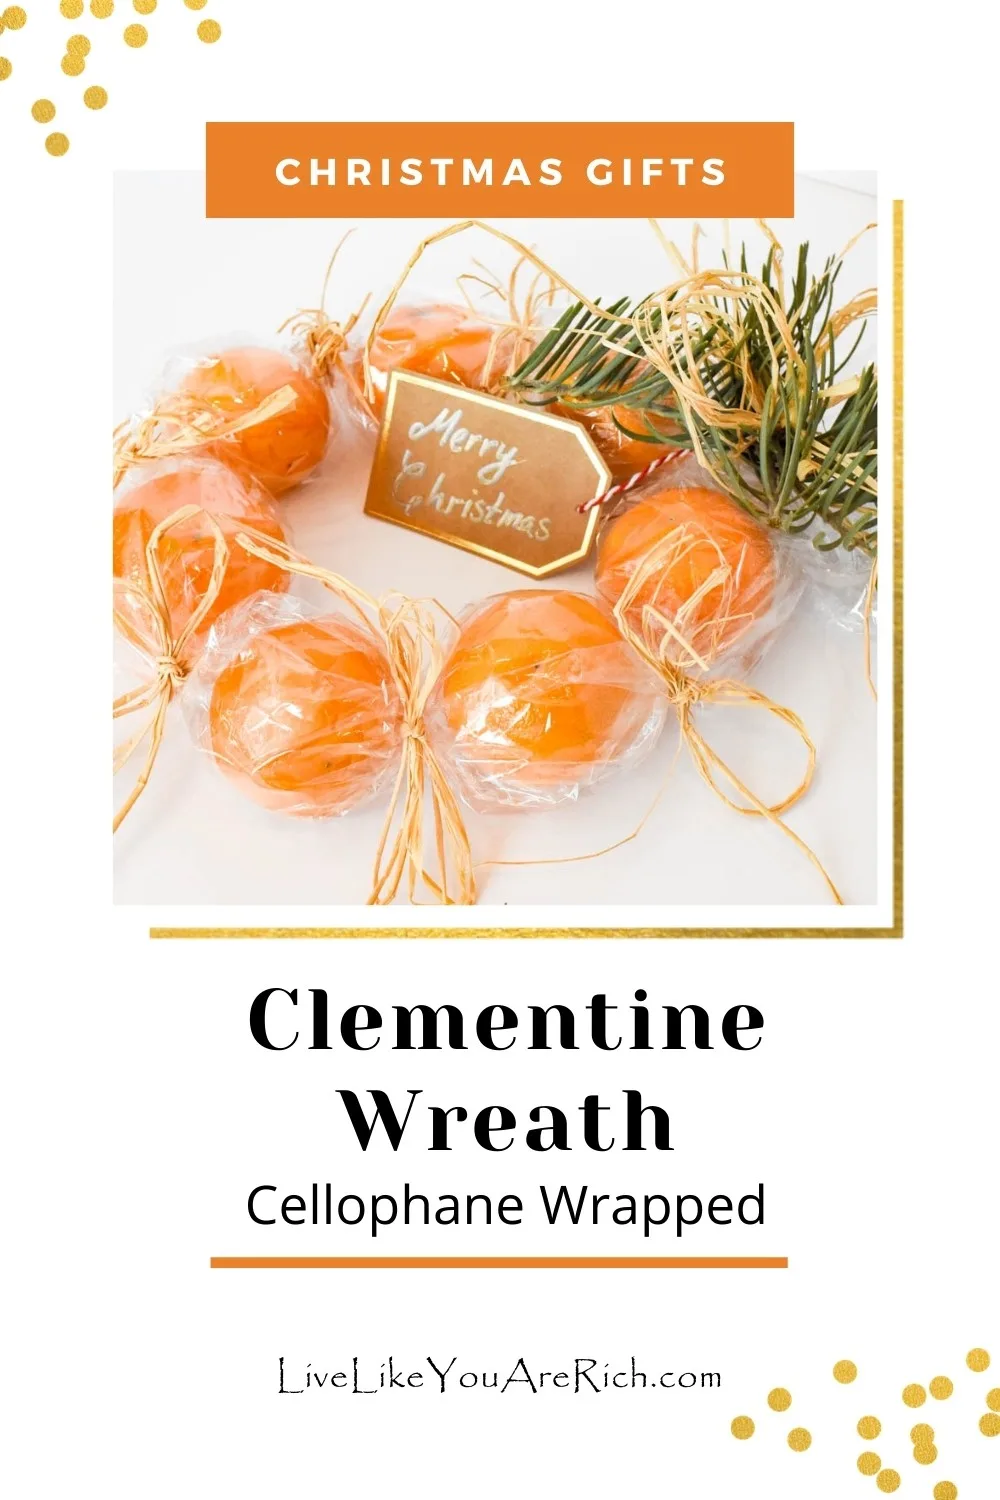 This clementine wreath-cellphone wrapped is a nice way to show appreciation to a friend, relative or neighbor for Christmas. These are easy to make—albeit a bit time consuming if you are trying to make a lot of them, but the end result is worth it! They take about 10 minutes each if you are making them alone. 